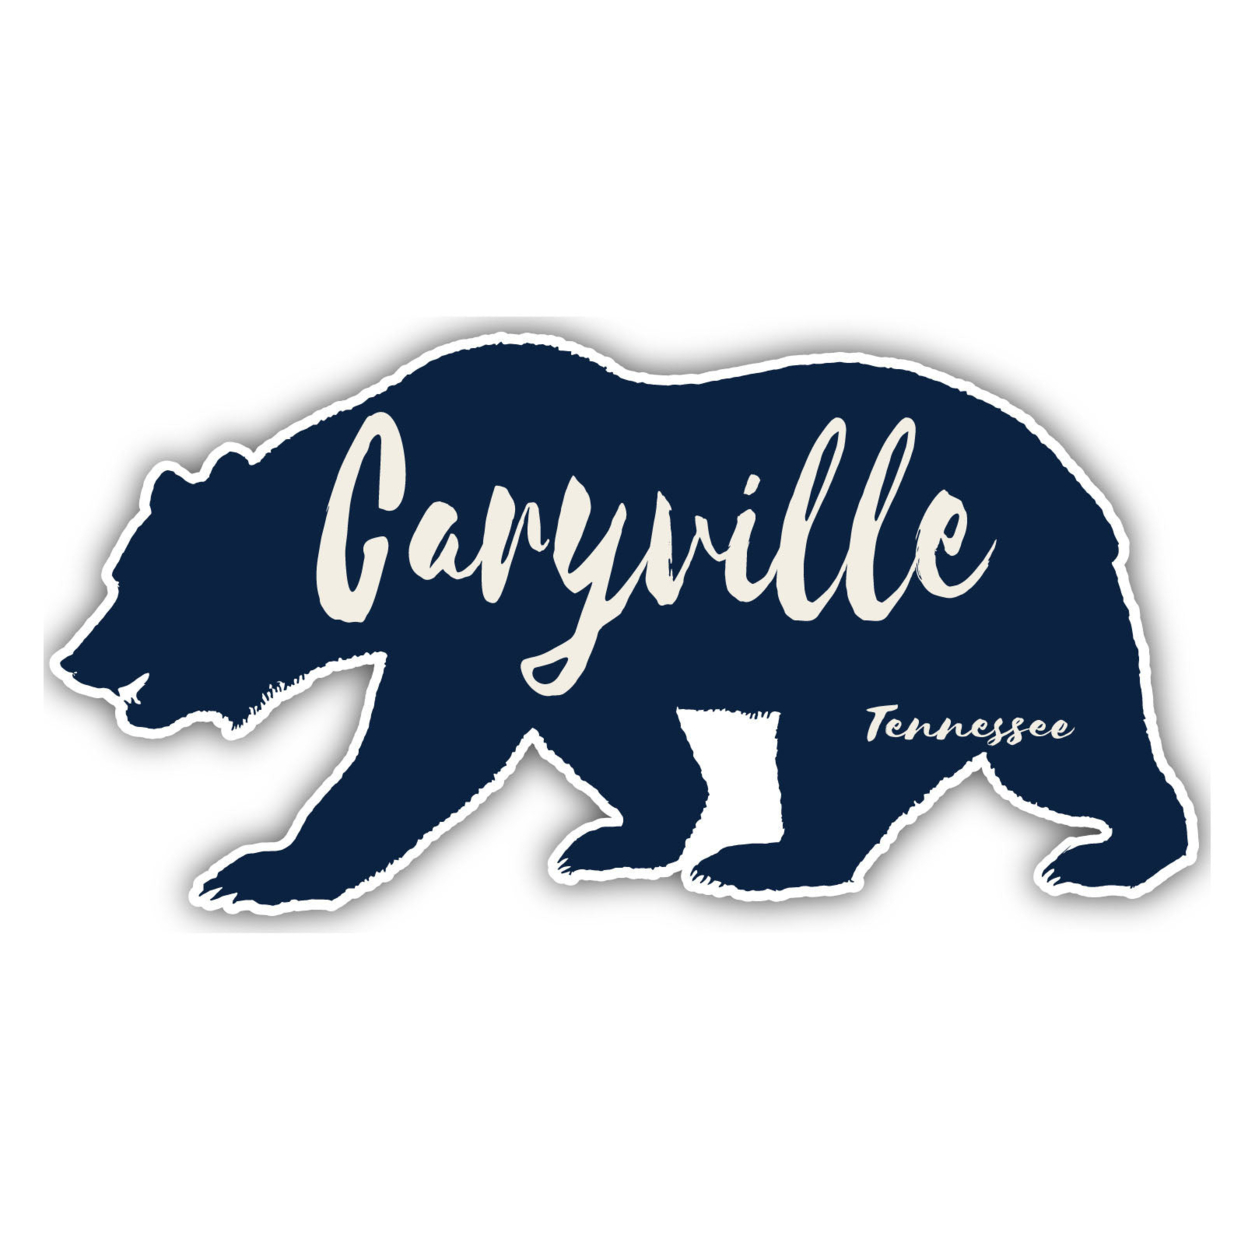 Caryville Tennessee Souvenir Decorative Stickers (Choose Theme And Size) - 4-Pack, 4-Inch, Bear